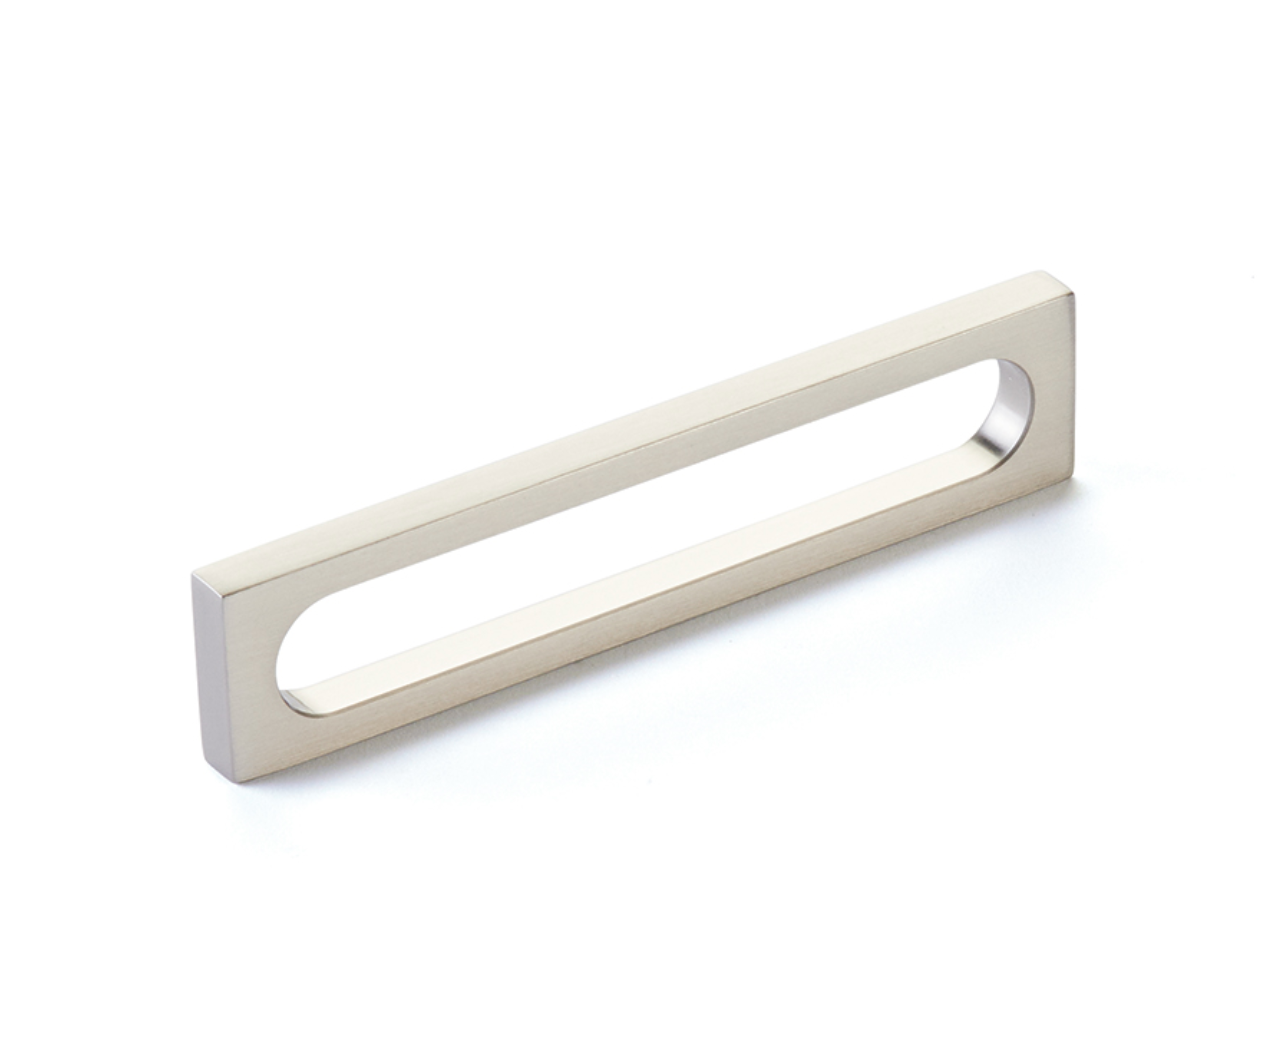 Brushed Nickel "Loop" Square Drawer Pulls and Cabinet Knobs - Industry Hardware